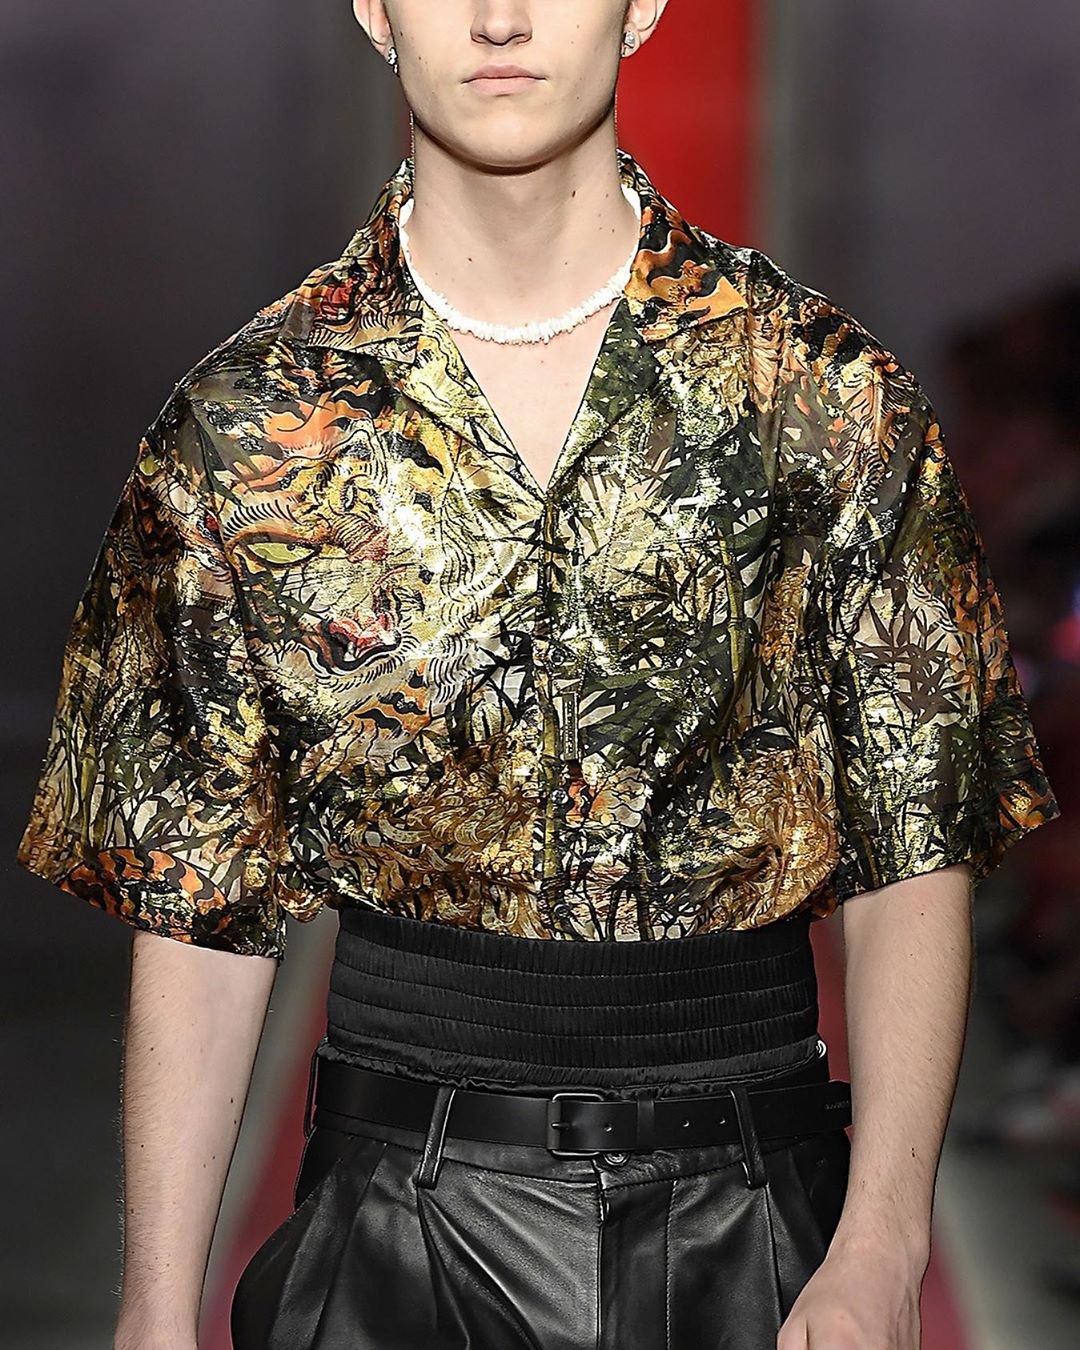 DSQUARED2  - Dean & Dan Caten - #D2SS20: summer-wardrobe update. All printed shirts now at Dsquared2.com